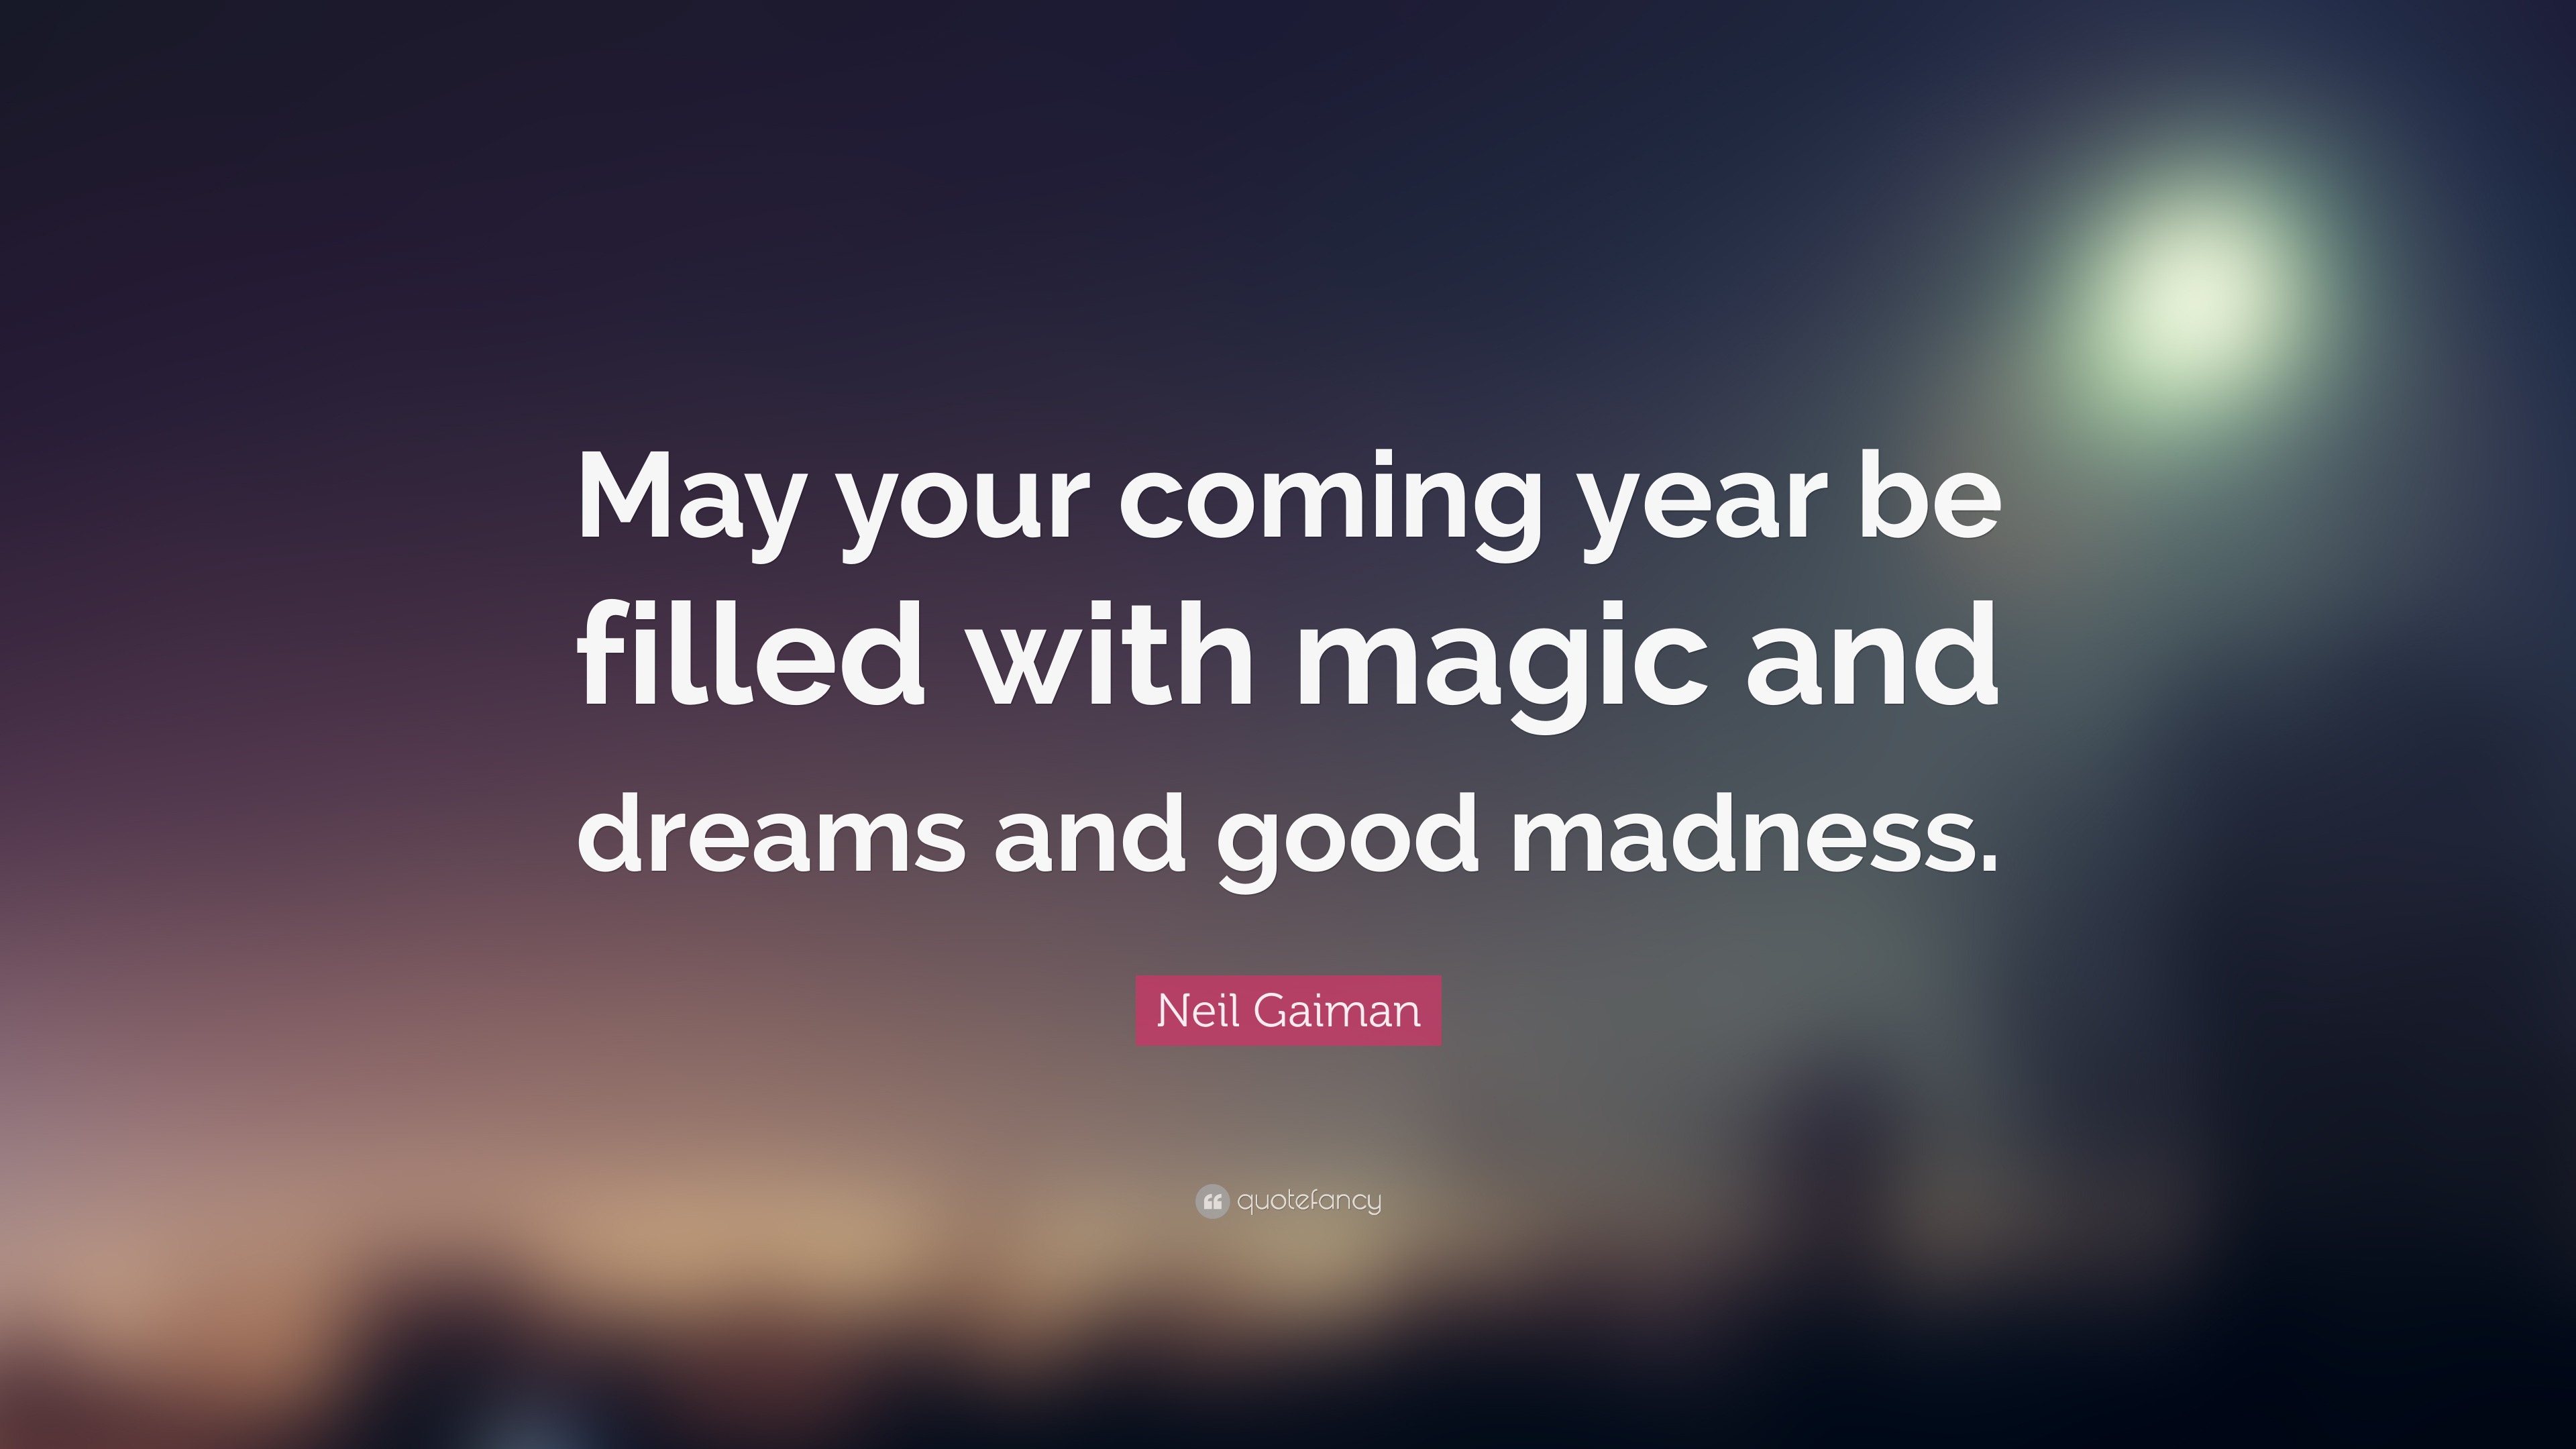 Neil Gaiman Quote “May your coming year be filled with magic and